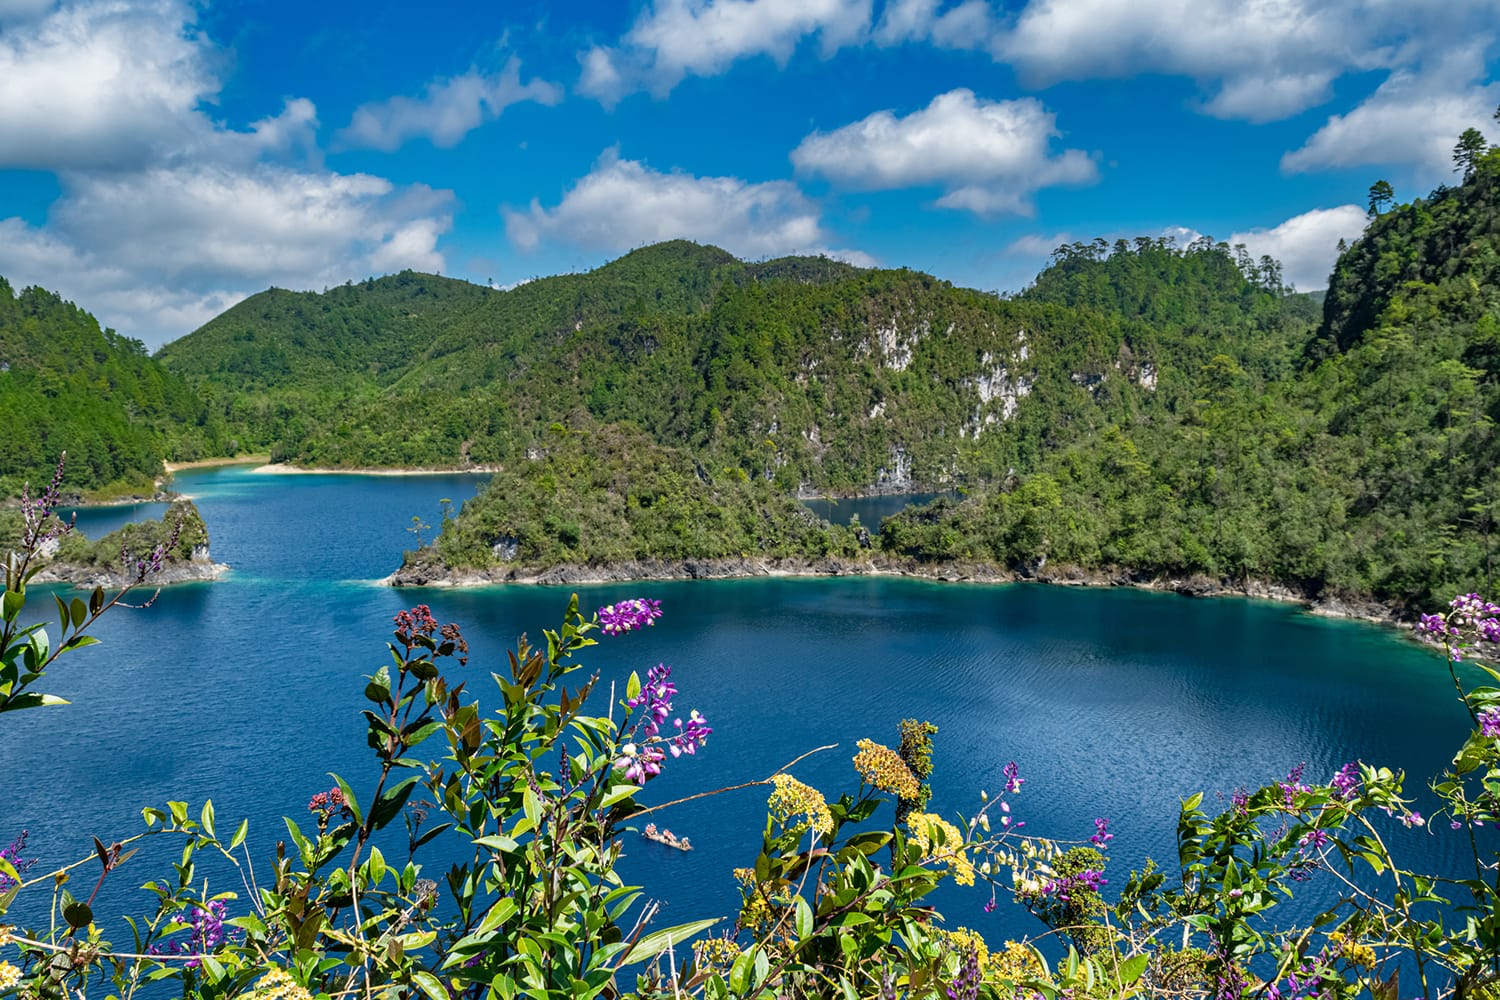 Wildflowers against turquoise waters of one of the lakes in stunning Montebello Lakes National Parks (Parque de Lagunas de Montebello) in Chiapas, Mexico.